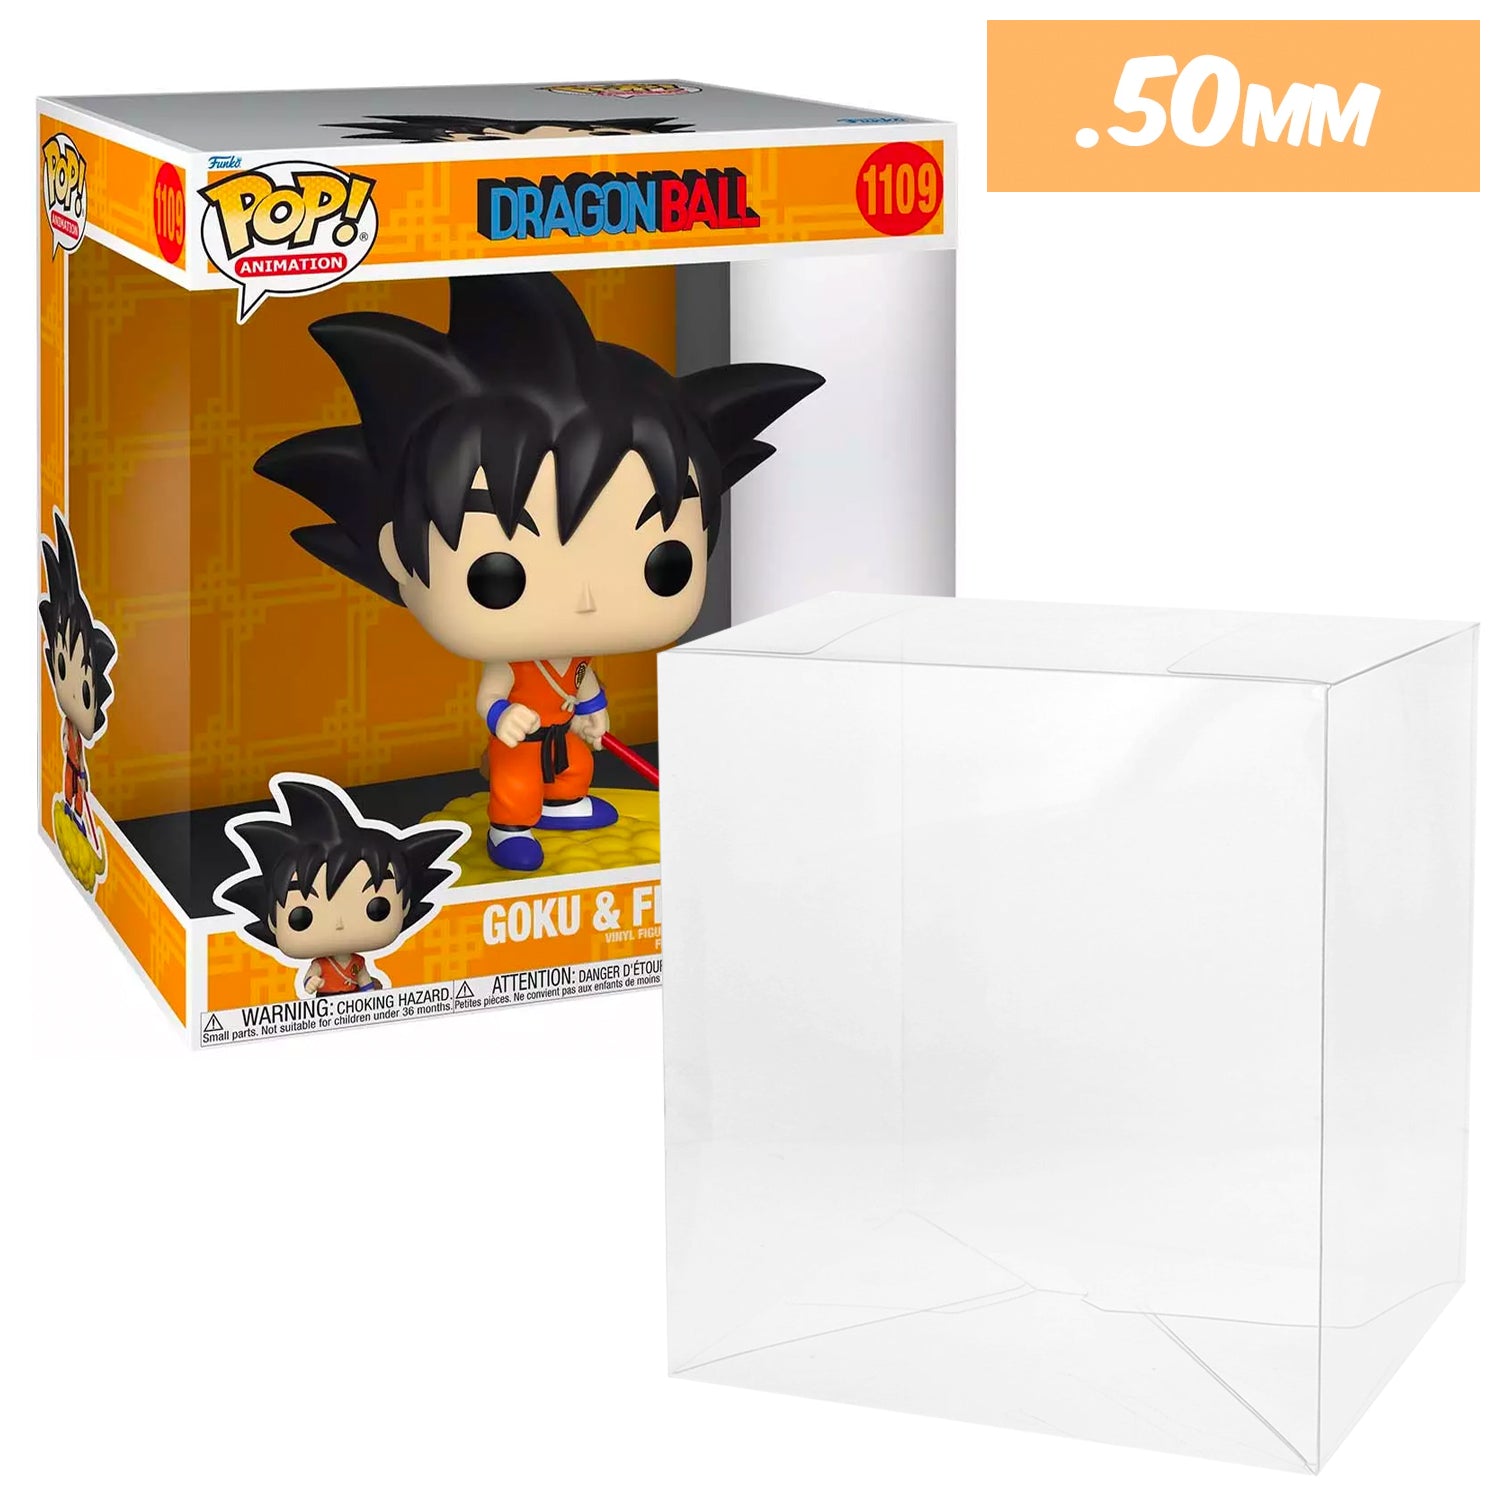 10 INCH WIDE DEEP Pop Protectors for GIANT Funko (50mm thick) 13 x 12w x  8.5d